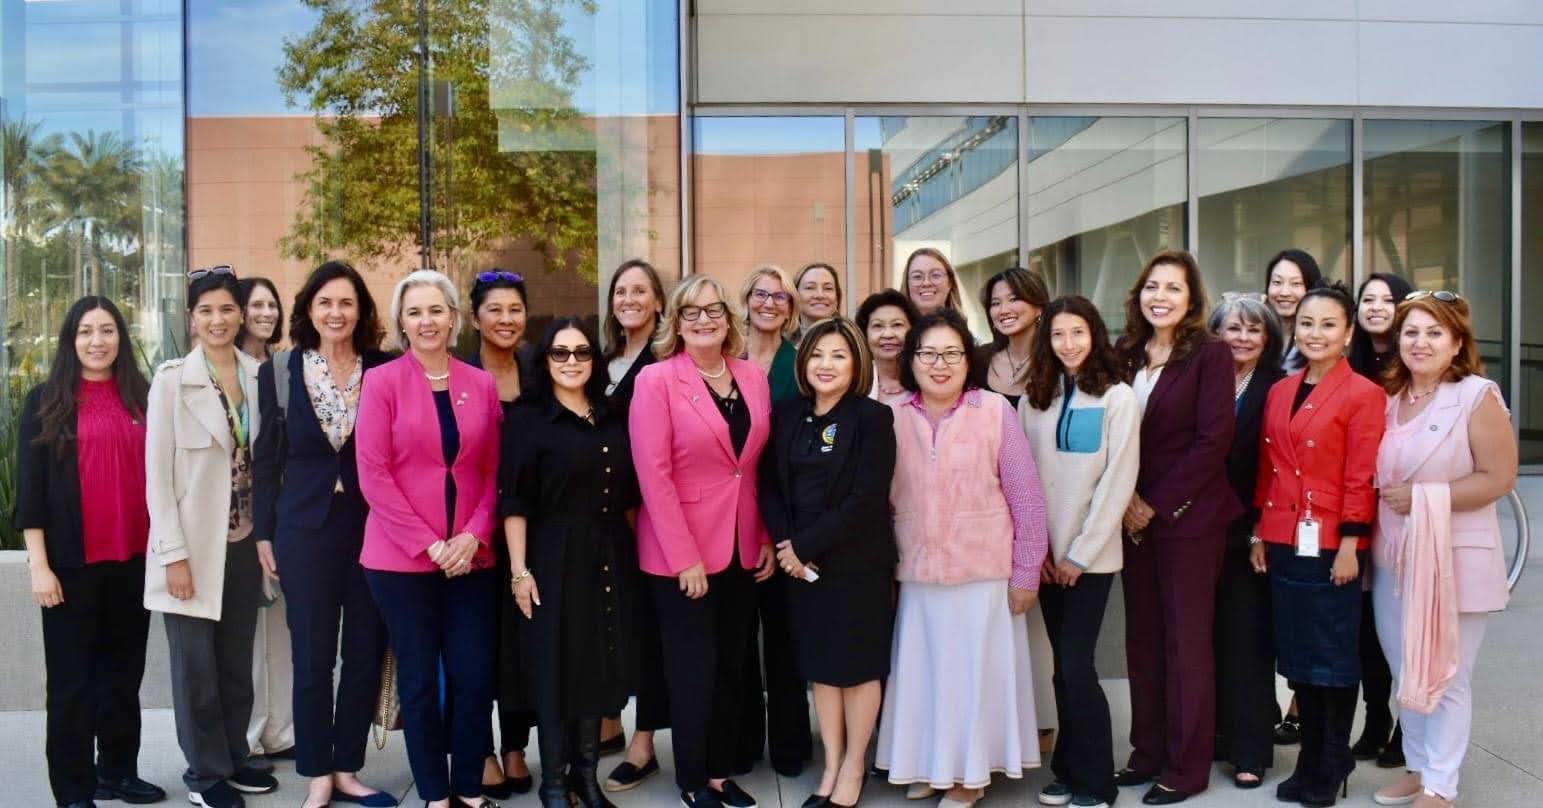 Prominent female figures of Orange County attend a roundtable discussion on the status of women and girls in Orange County.